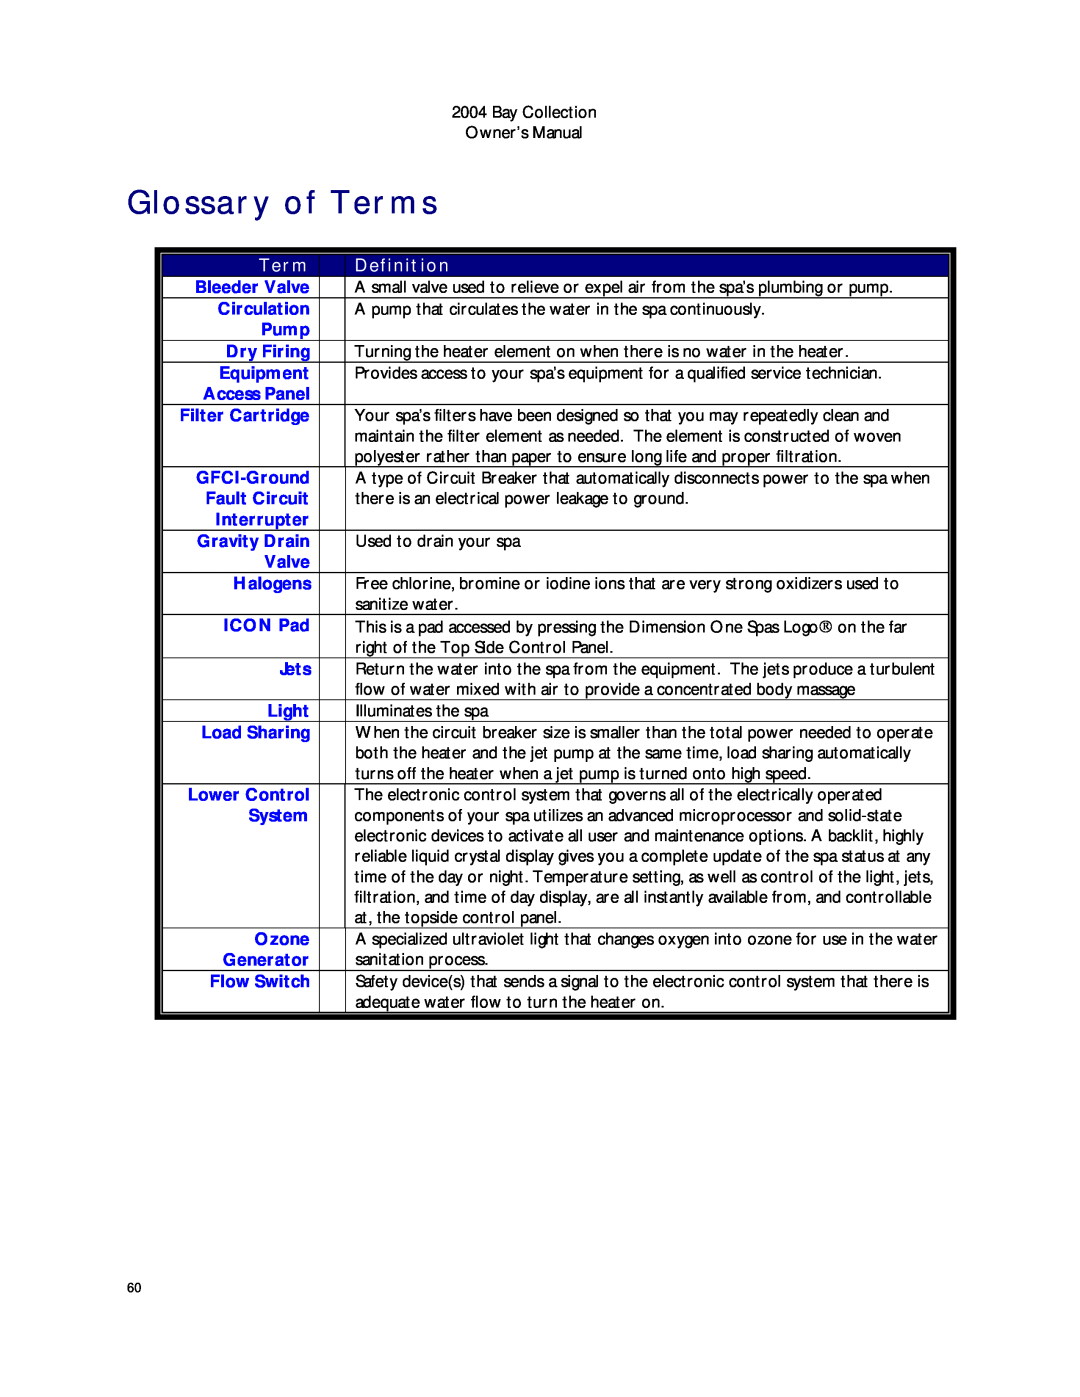 Dimension One Spas Bay Collection manual Glossary of Terms, Definition 